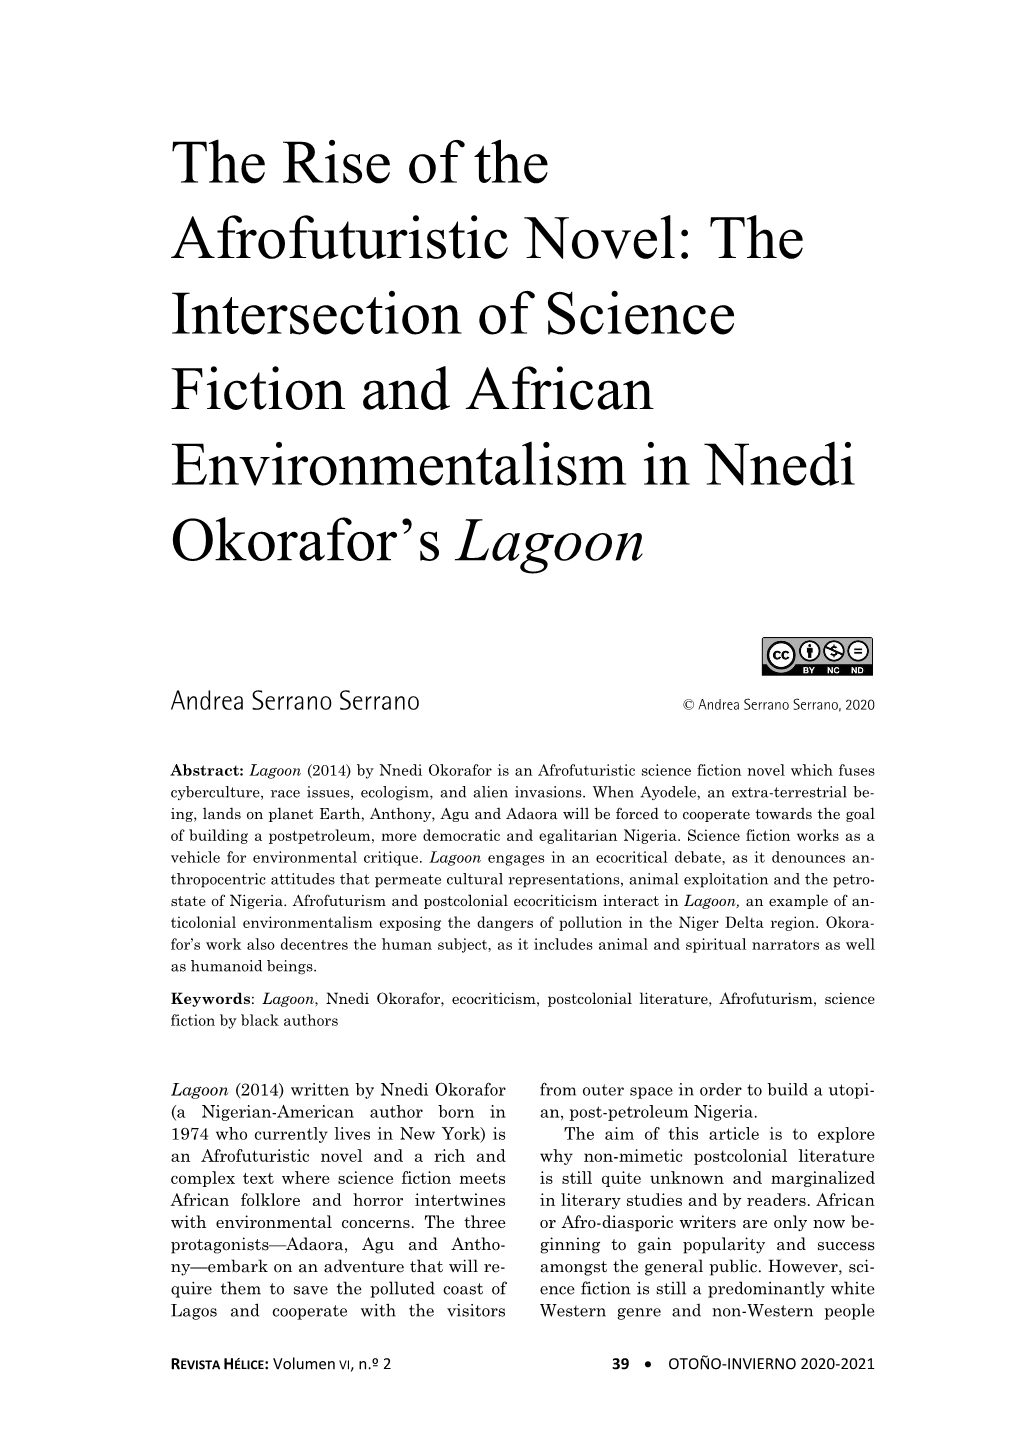 The Rise of the Afrofuturistic Novel: the Intersection of Science Fiction and African Environmentalism in Nnedi Okorafor’S Lagoon